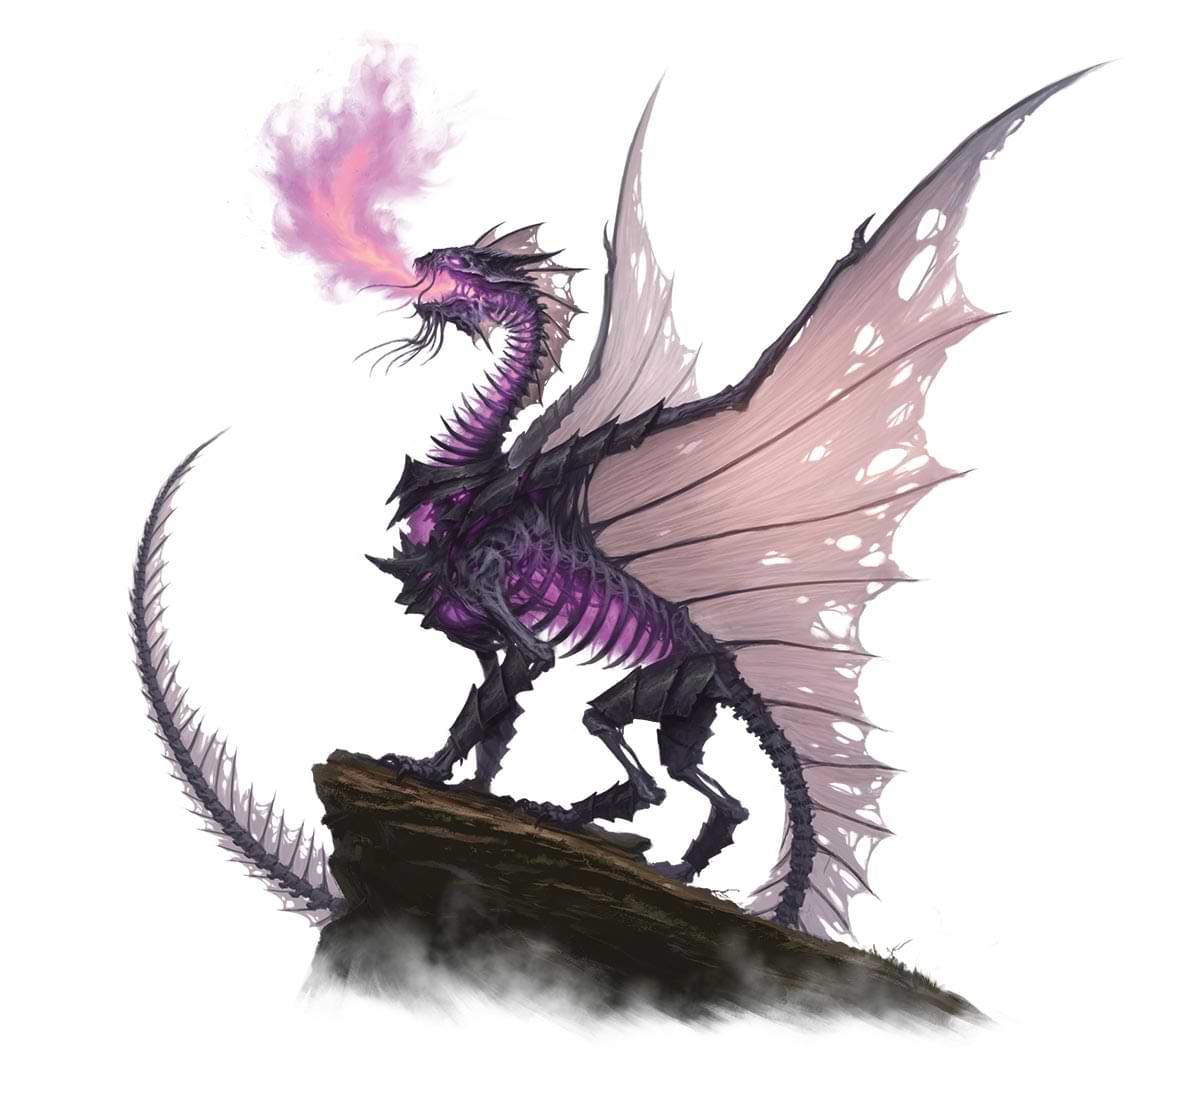 A greater death dragon burning with purple flames